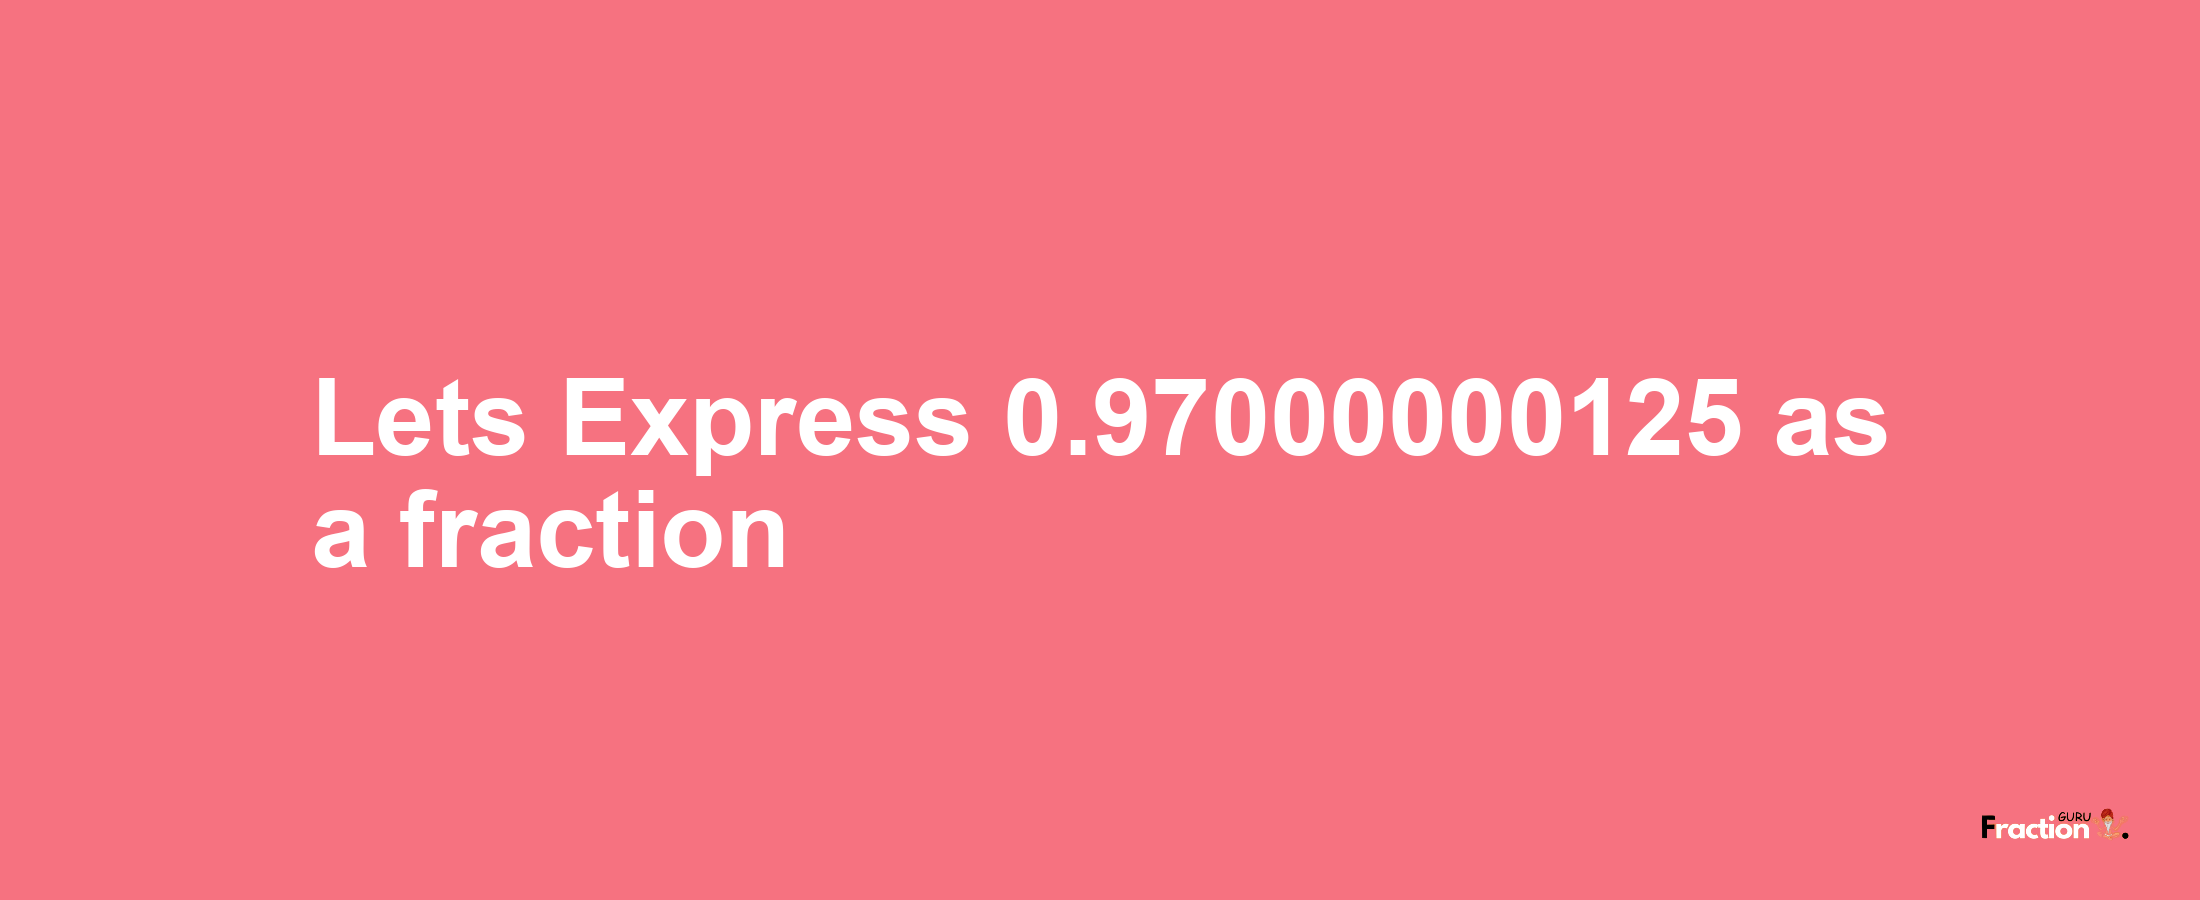 Lets Express 0.97000000125 as afraction